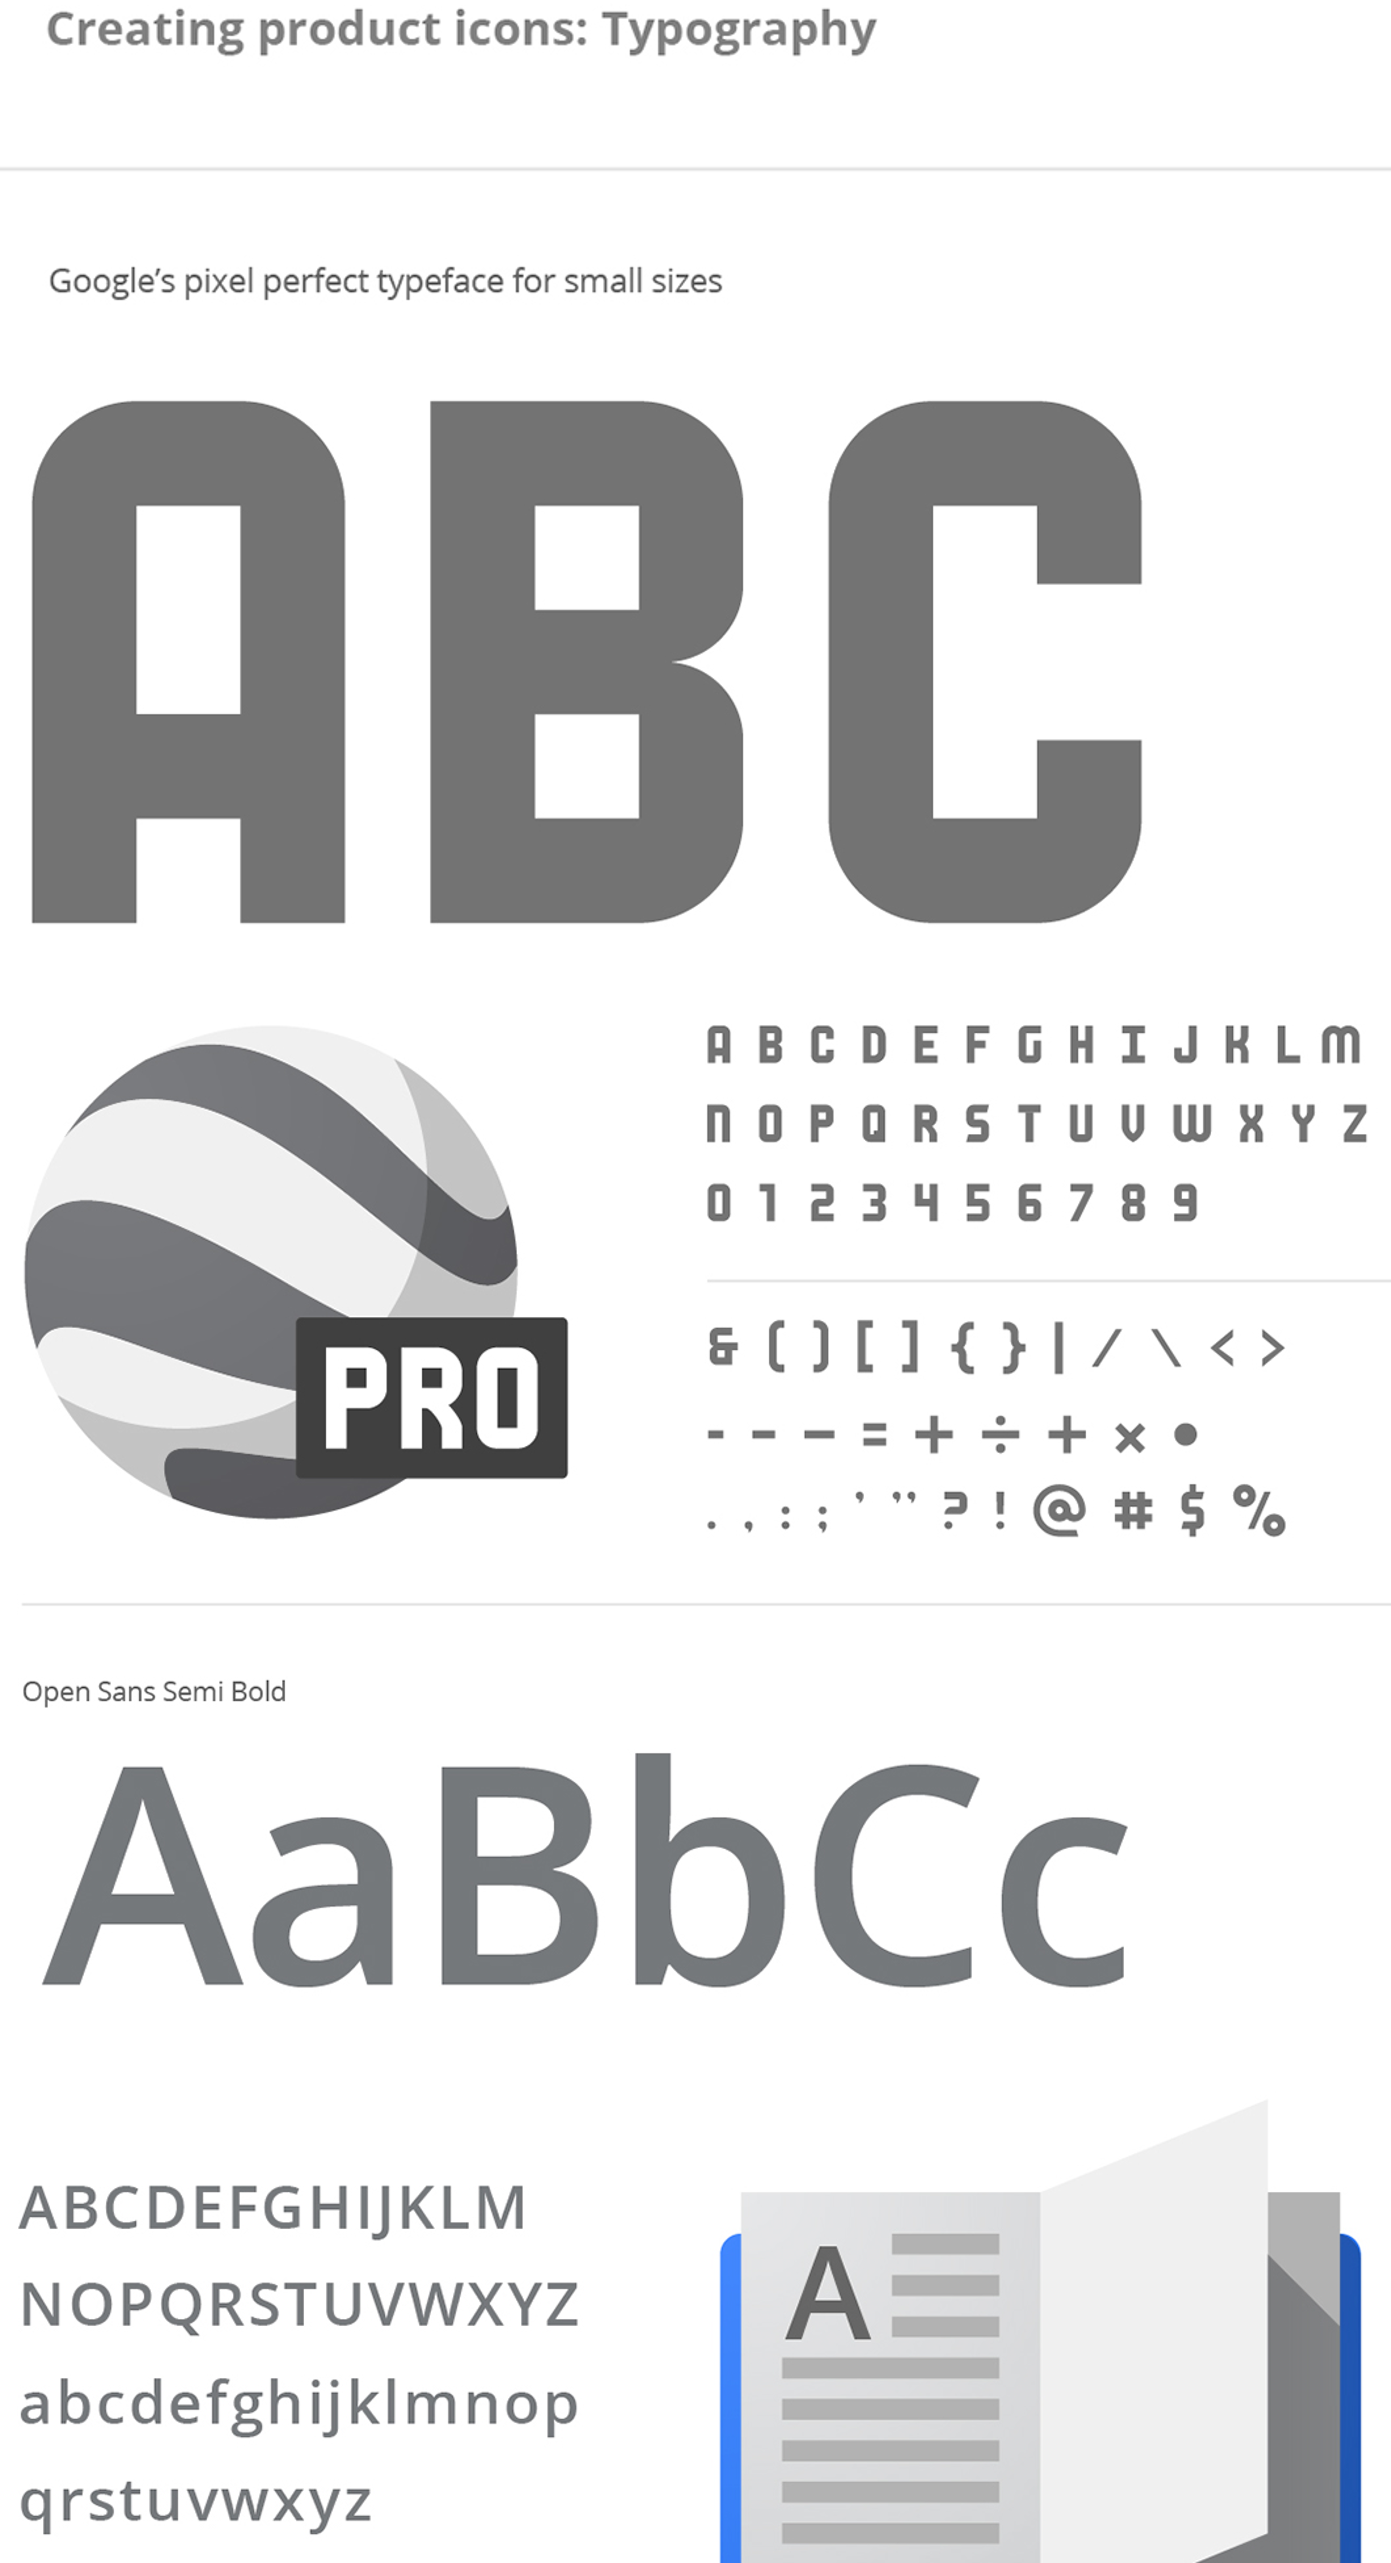 Google's typography guide